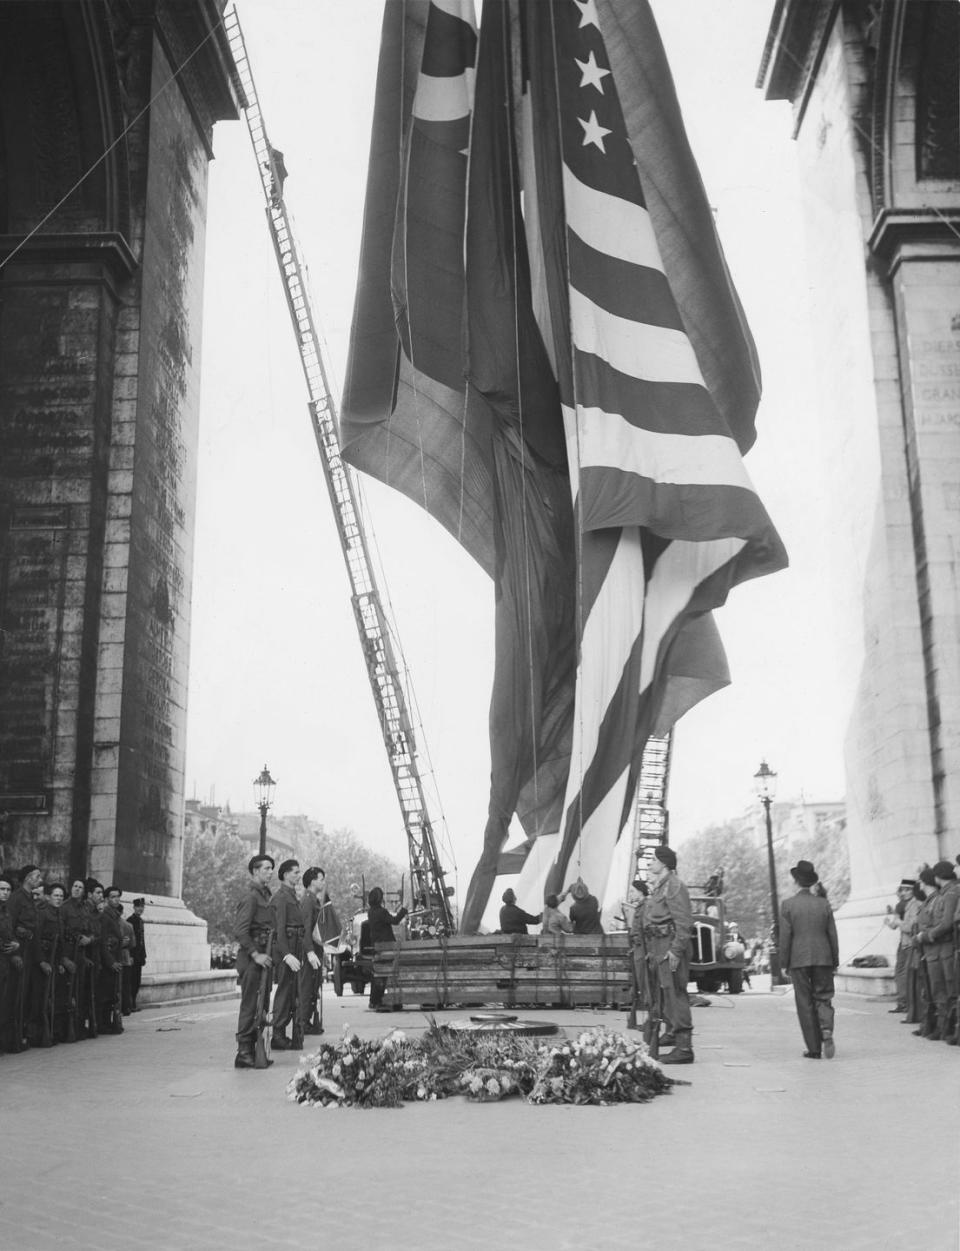 <p>The flags of Russia, France, China, Great Britain, and the United States are hoisted inside Paris' famous Arc de Triomphe following the surrender announcement.</p>